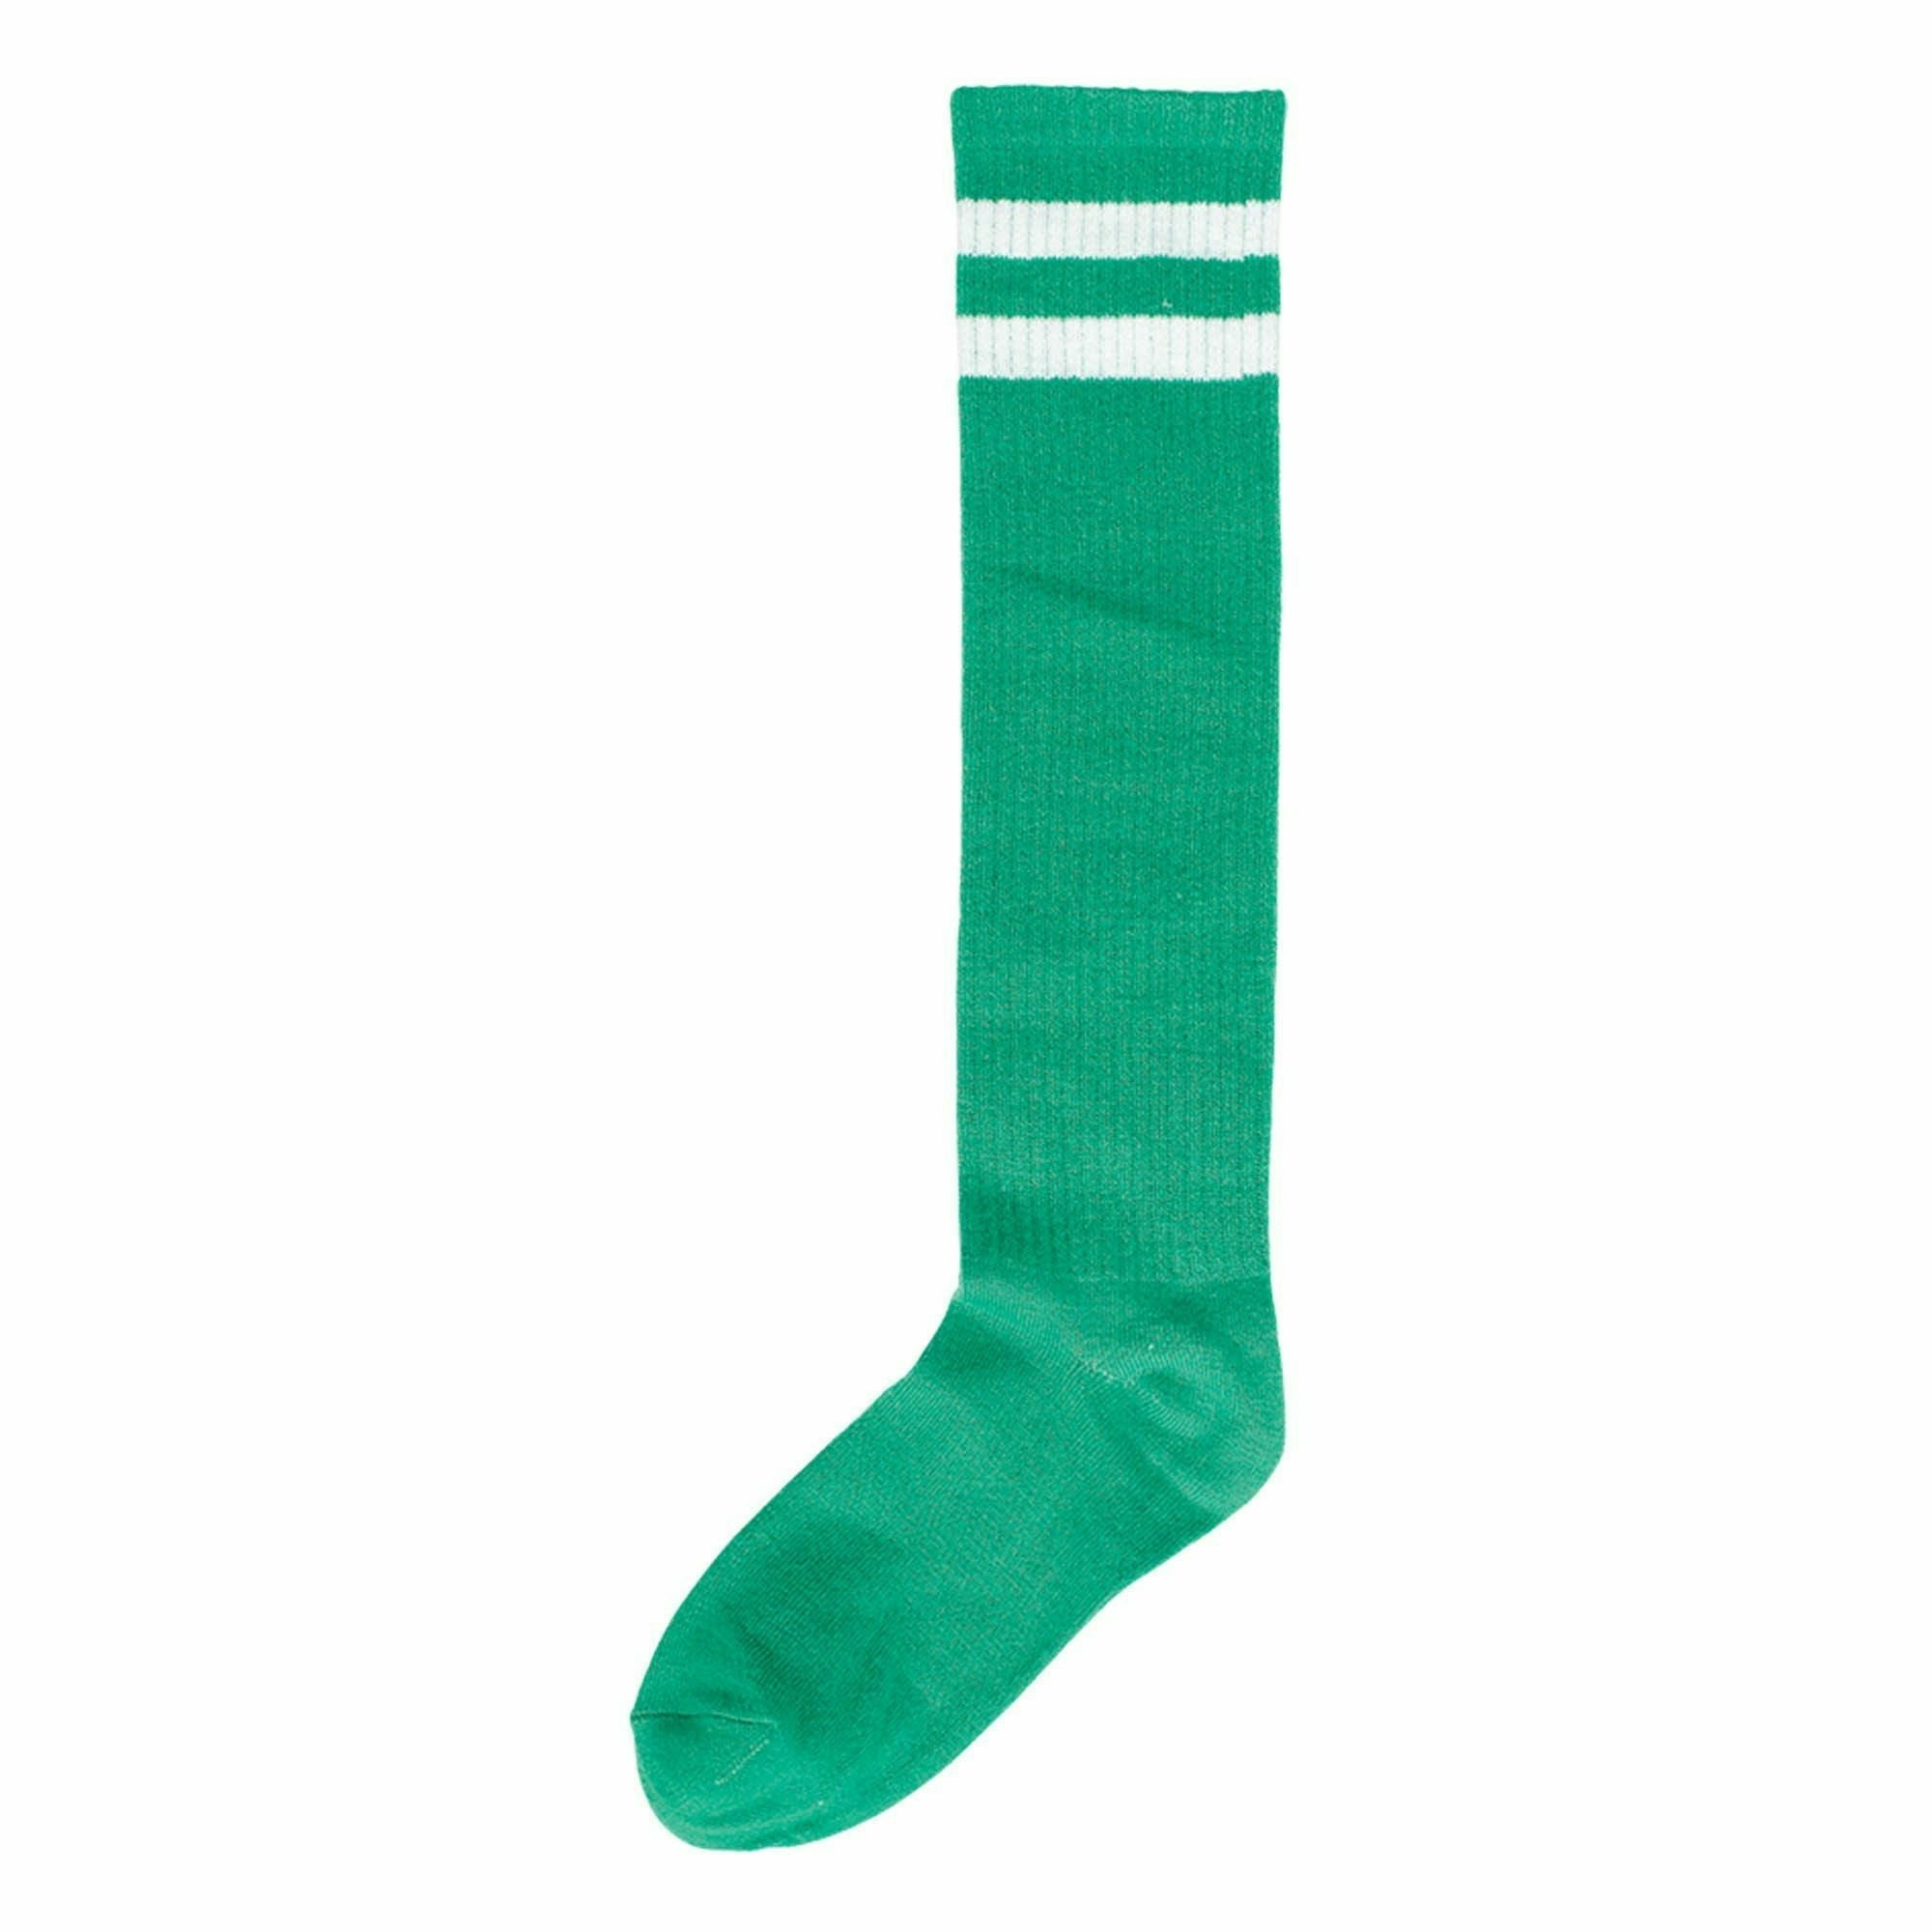 Amscan COSTUMES: ACCESSORIES Green Striped Knee Socks